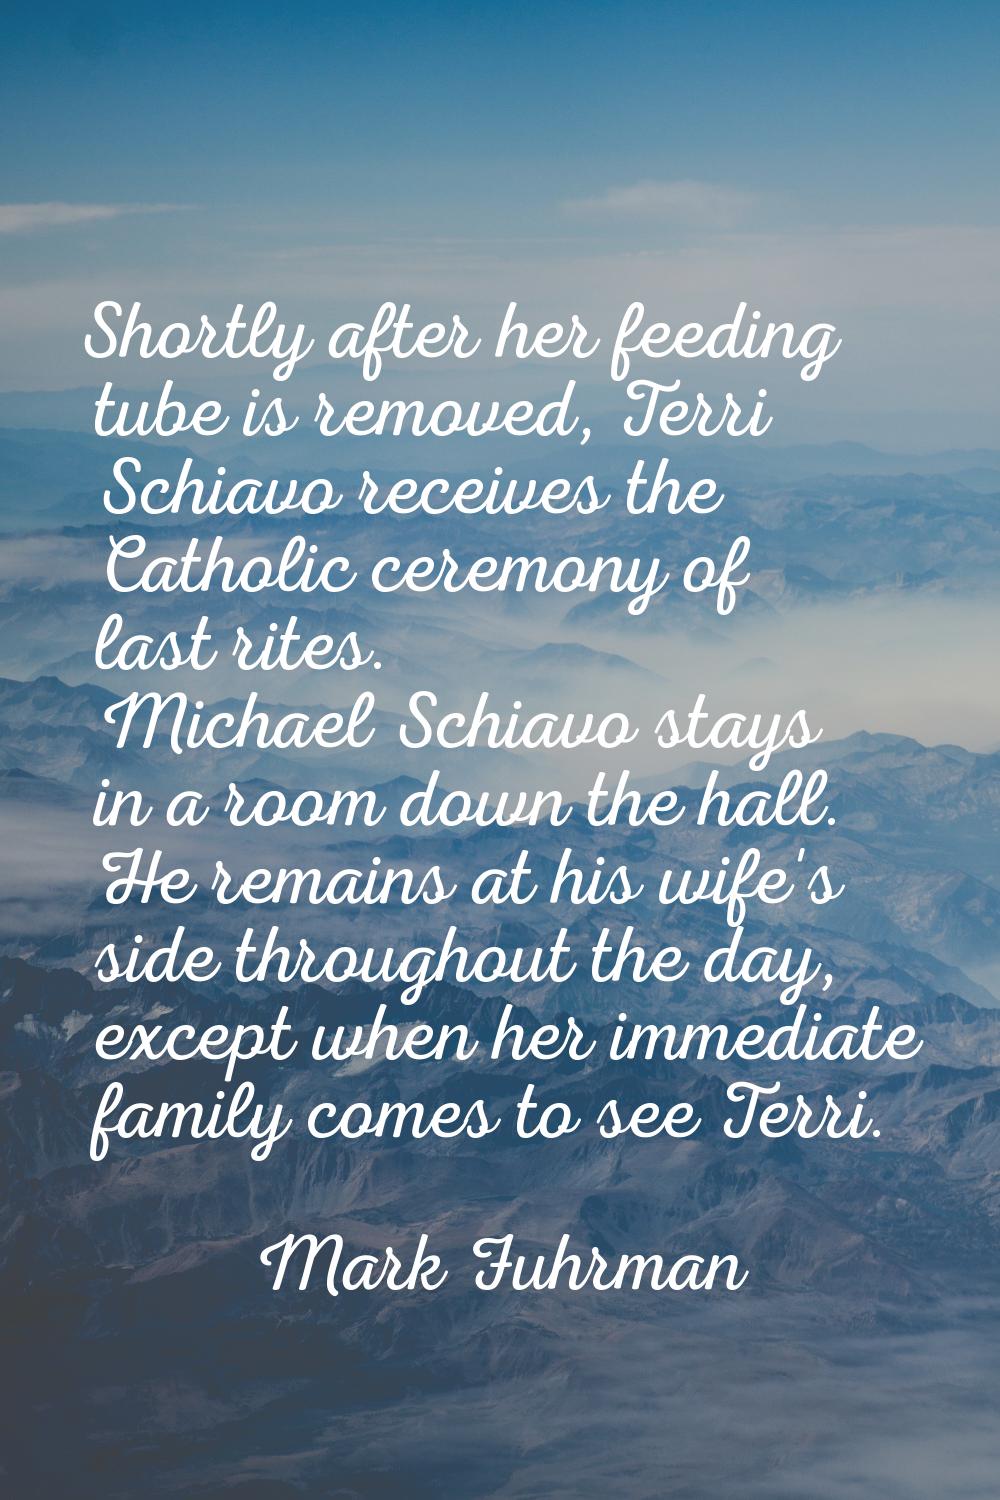 Shortly after her feeding tube is removed, Terri Schiavo receives the Catholic ceremony of last rit